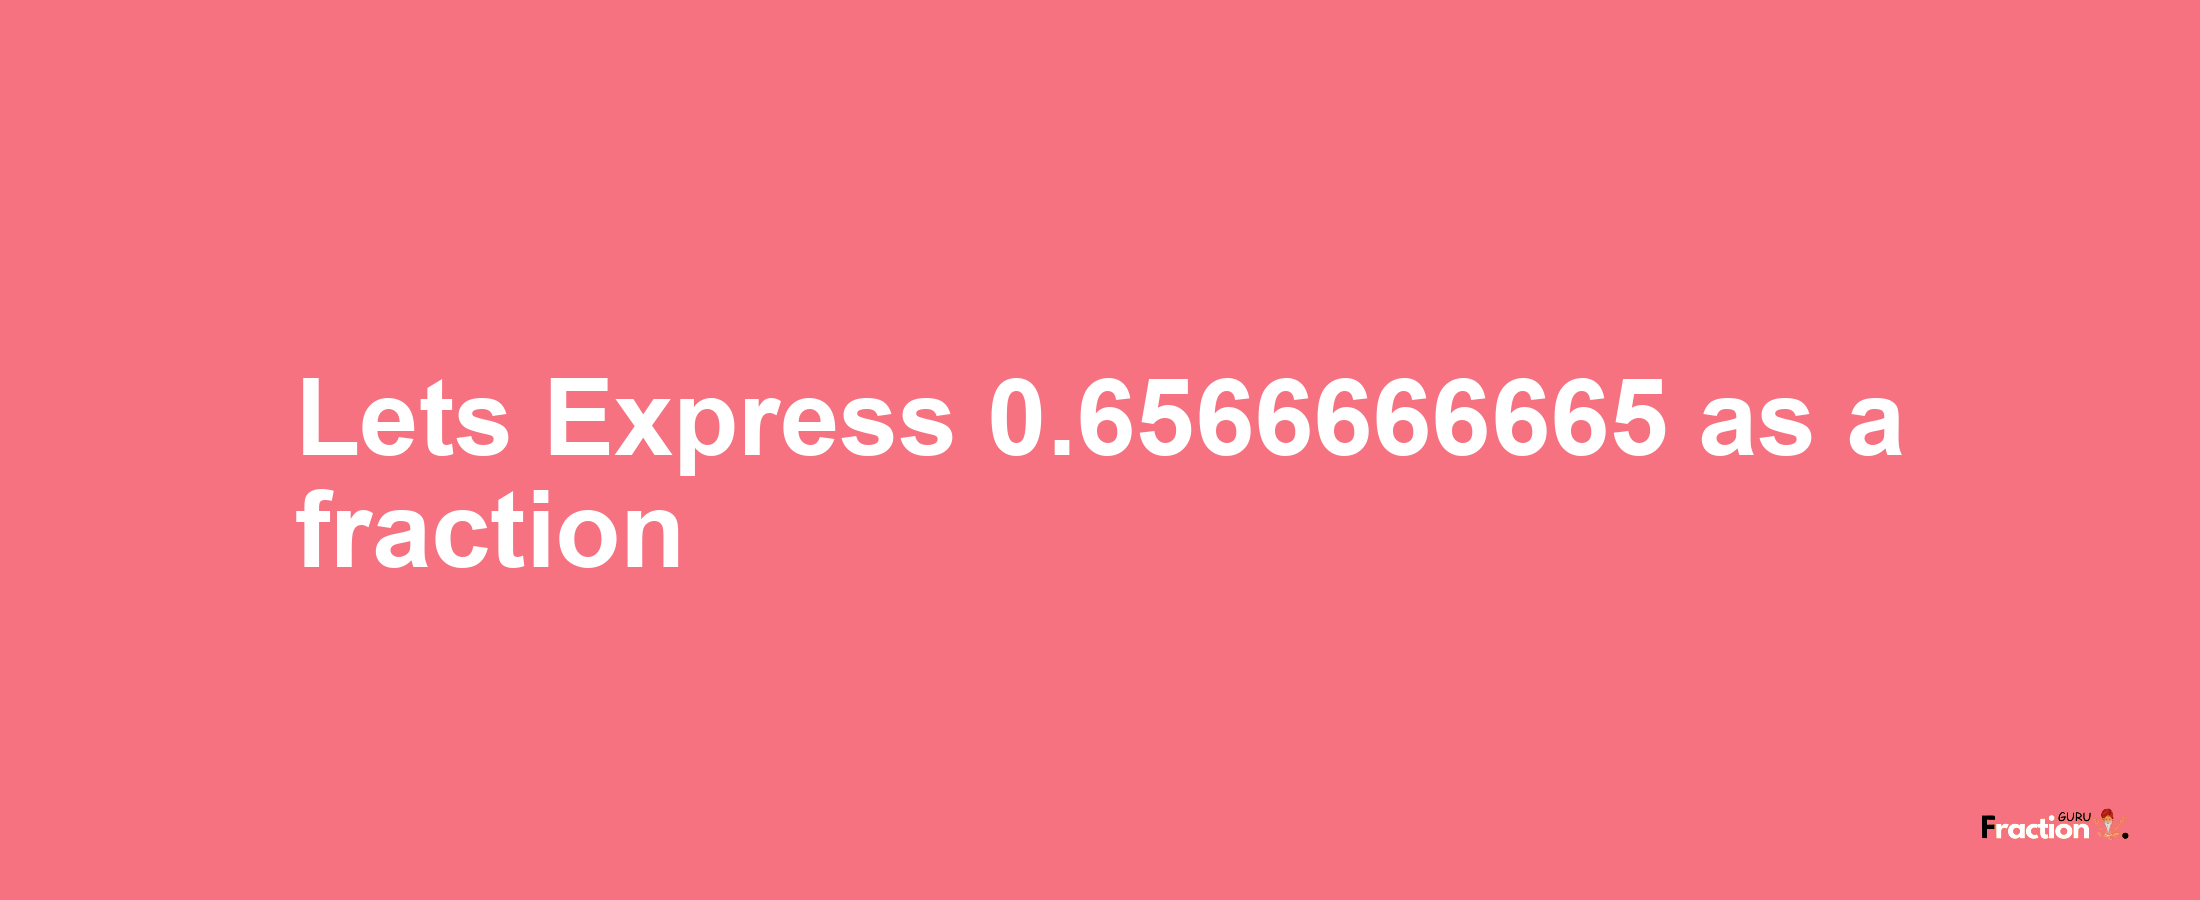 Lets Express 0.6566666665 as afraction